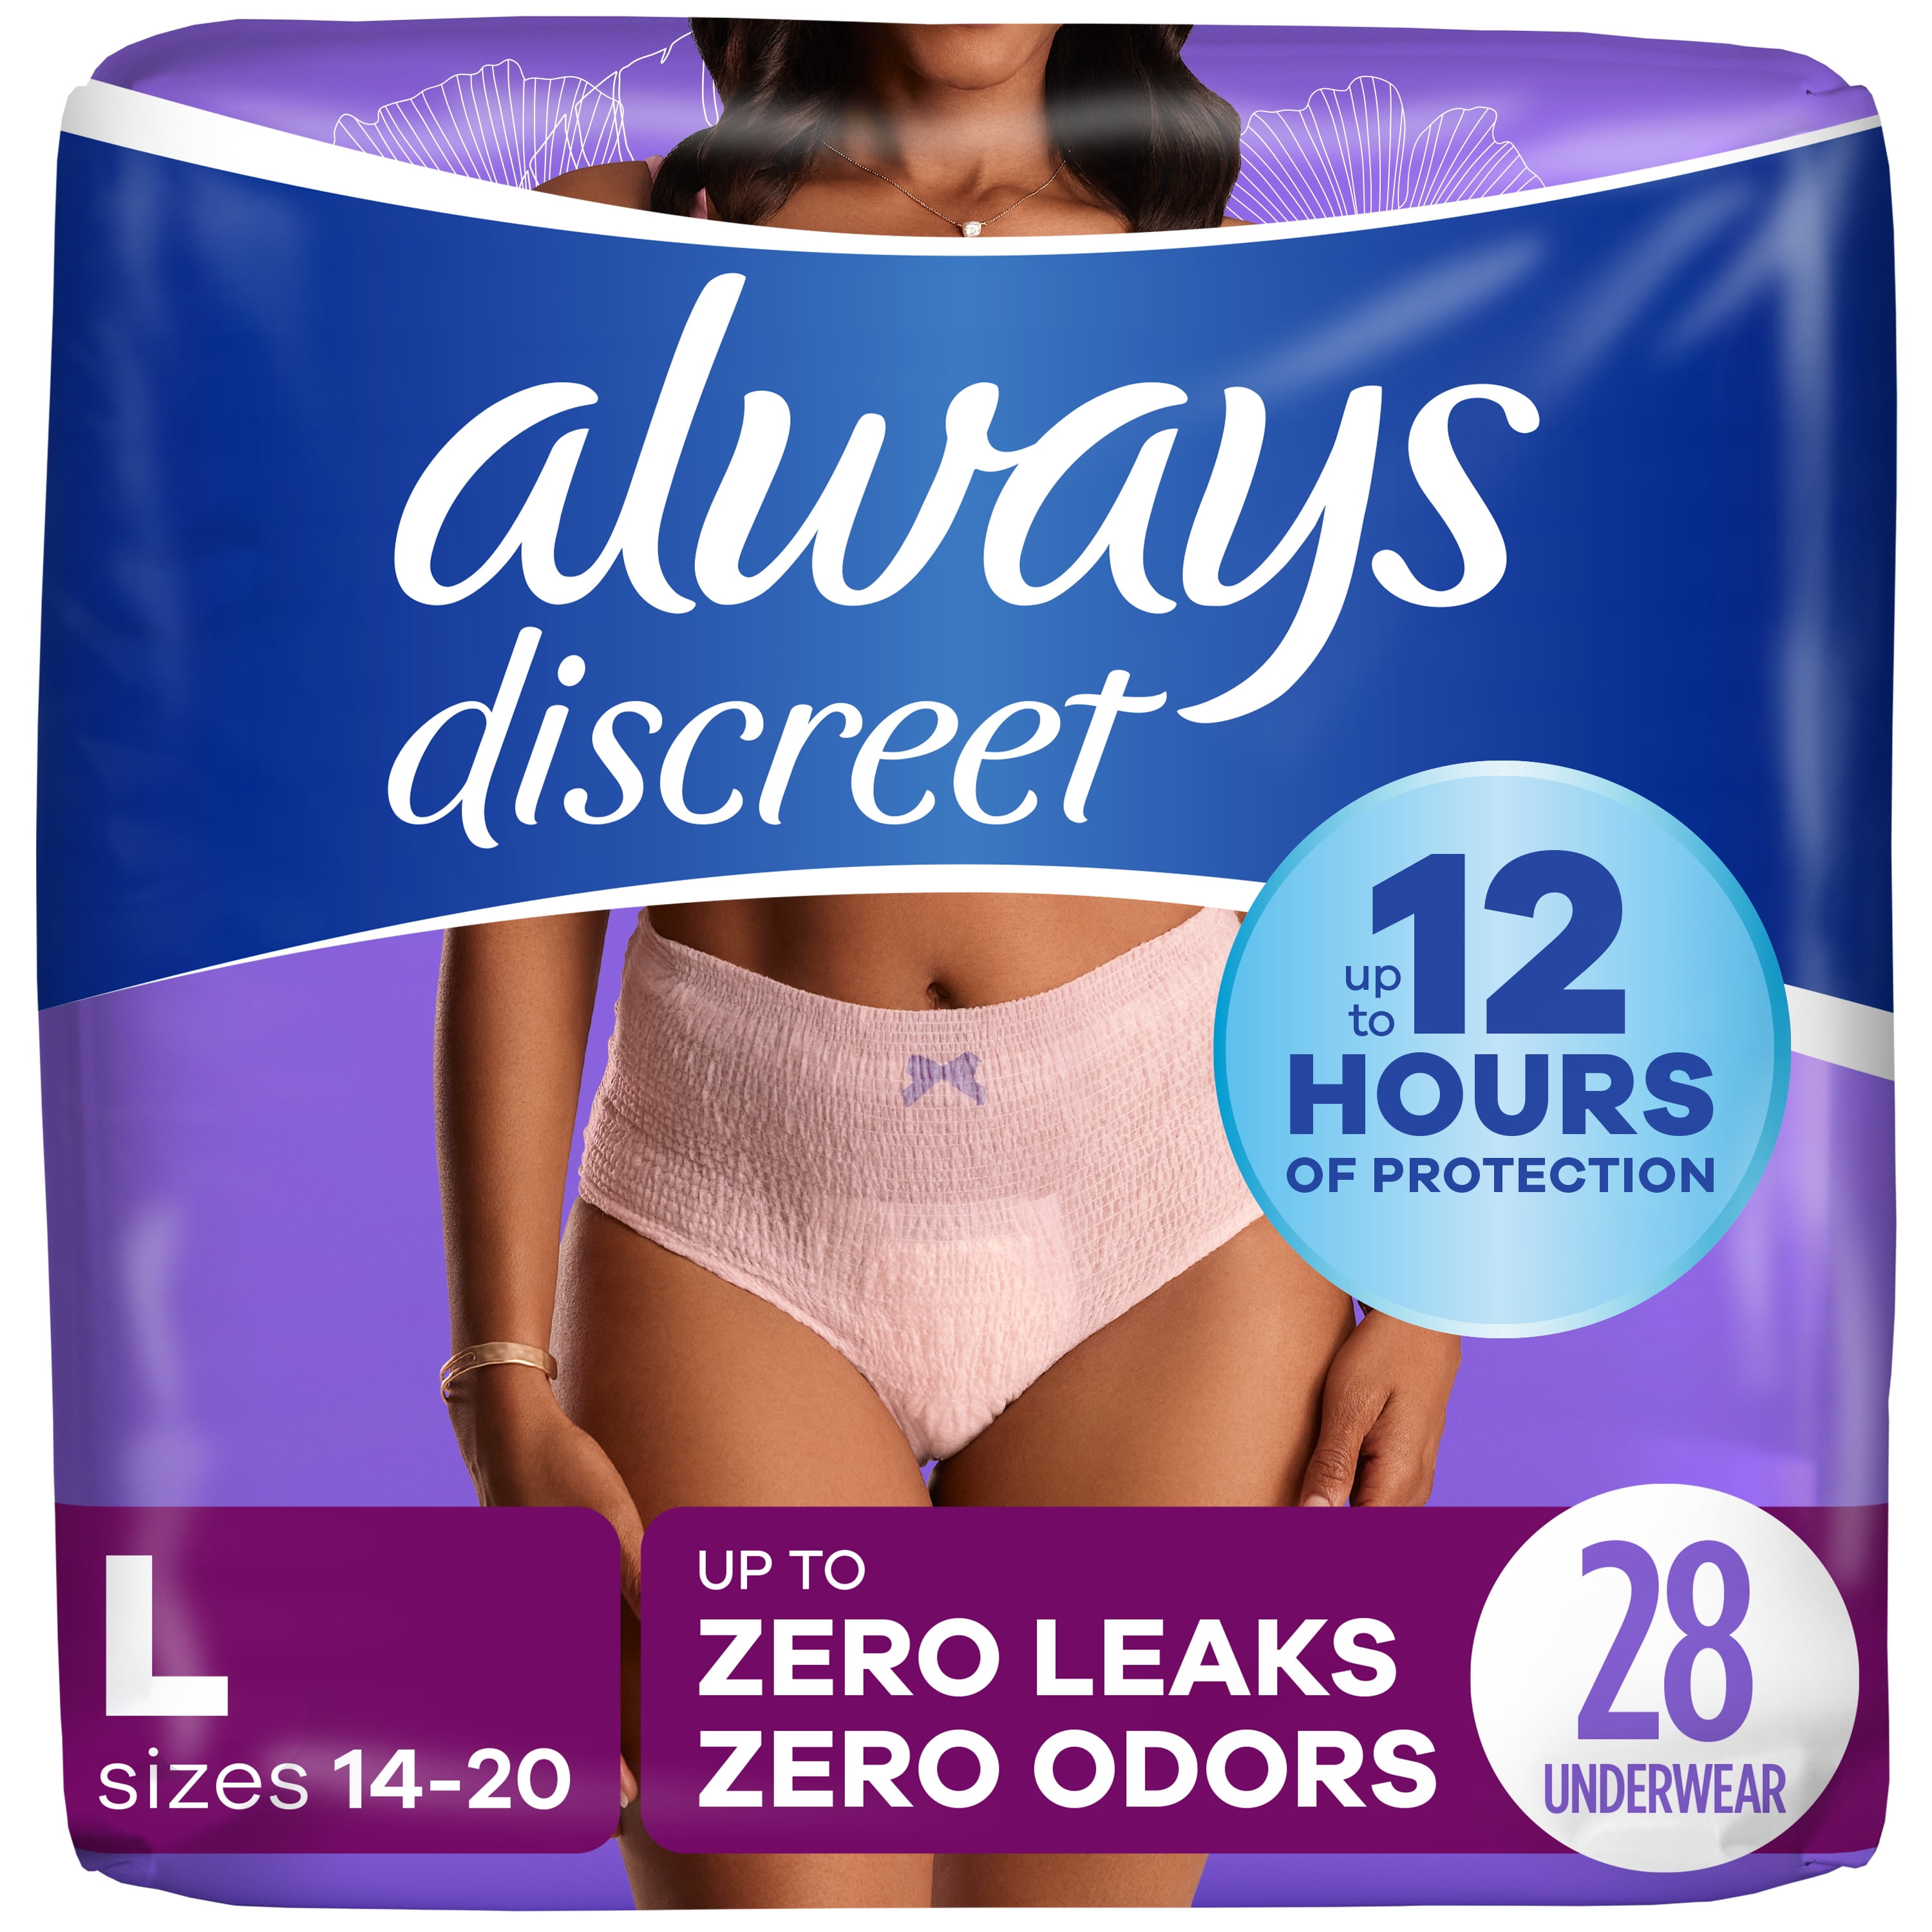 Always Discreet Maximum Absorbency Incontinence Underwear, L - 17 count